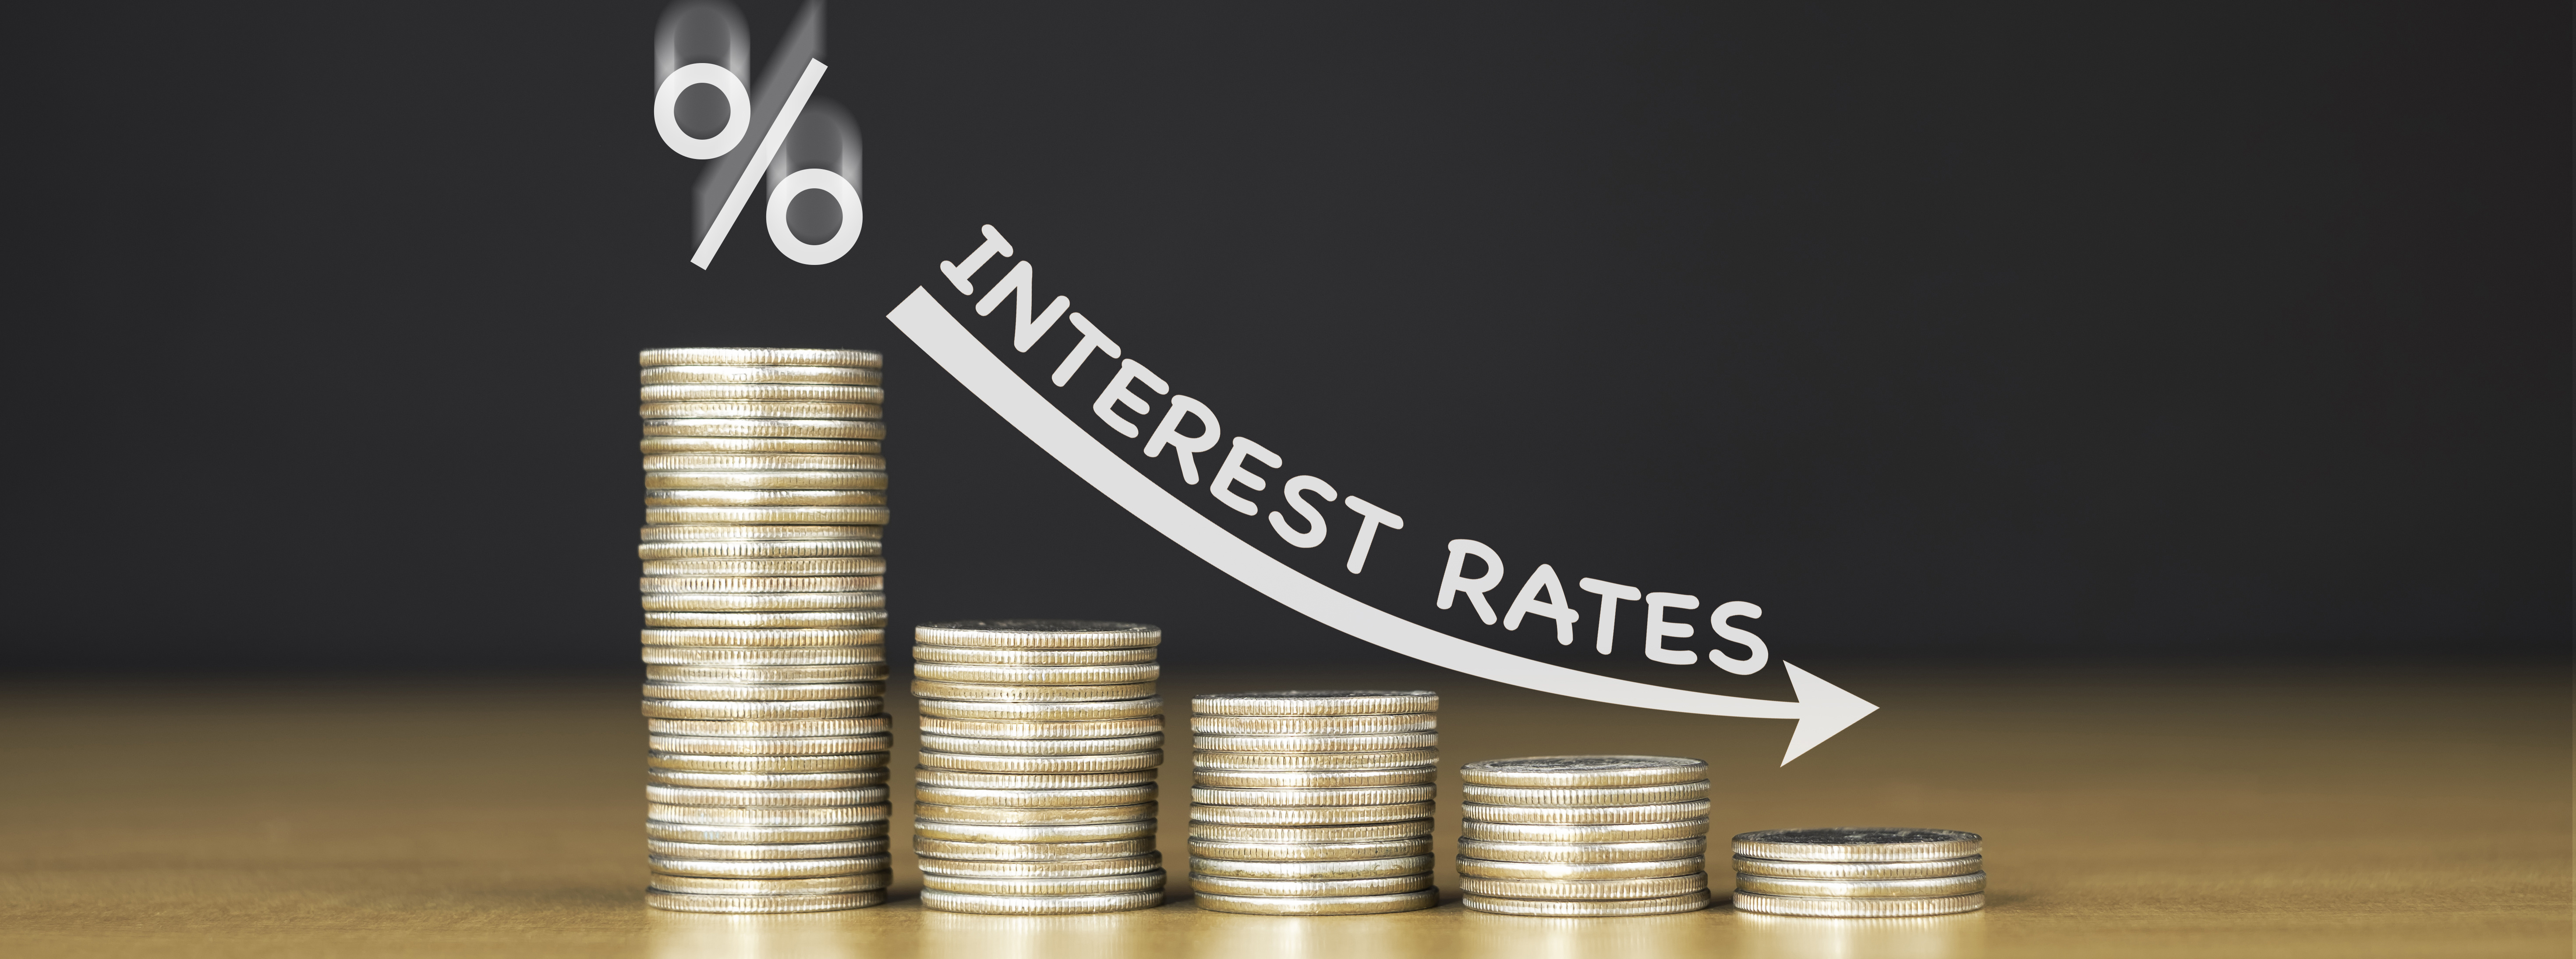 Low Rates Arent Just for Refinancing